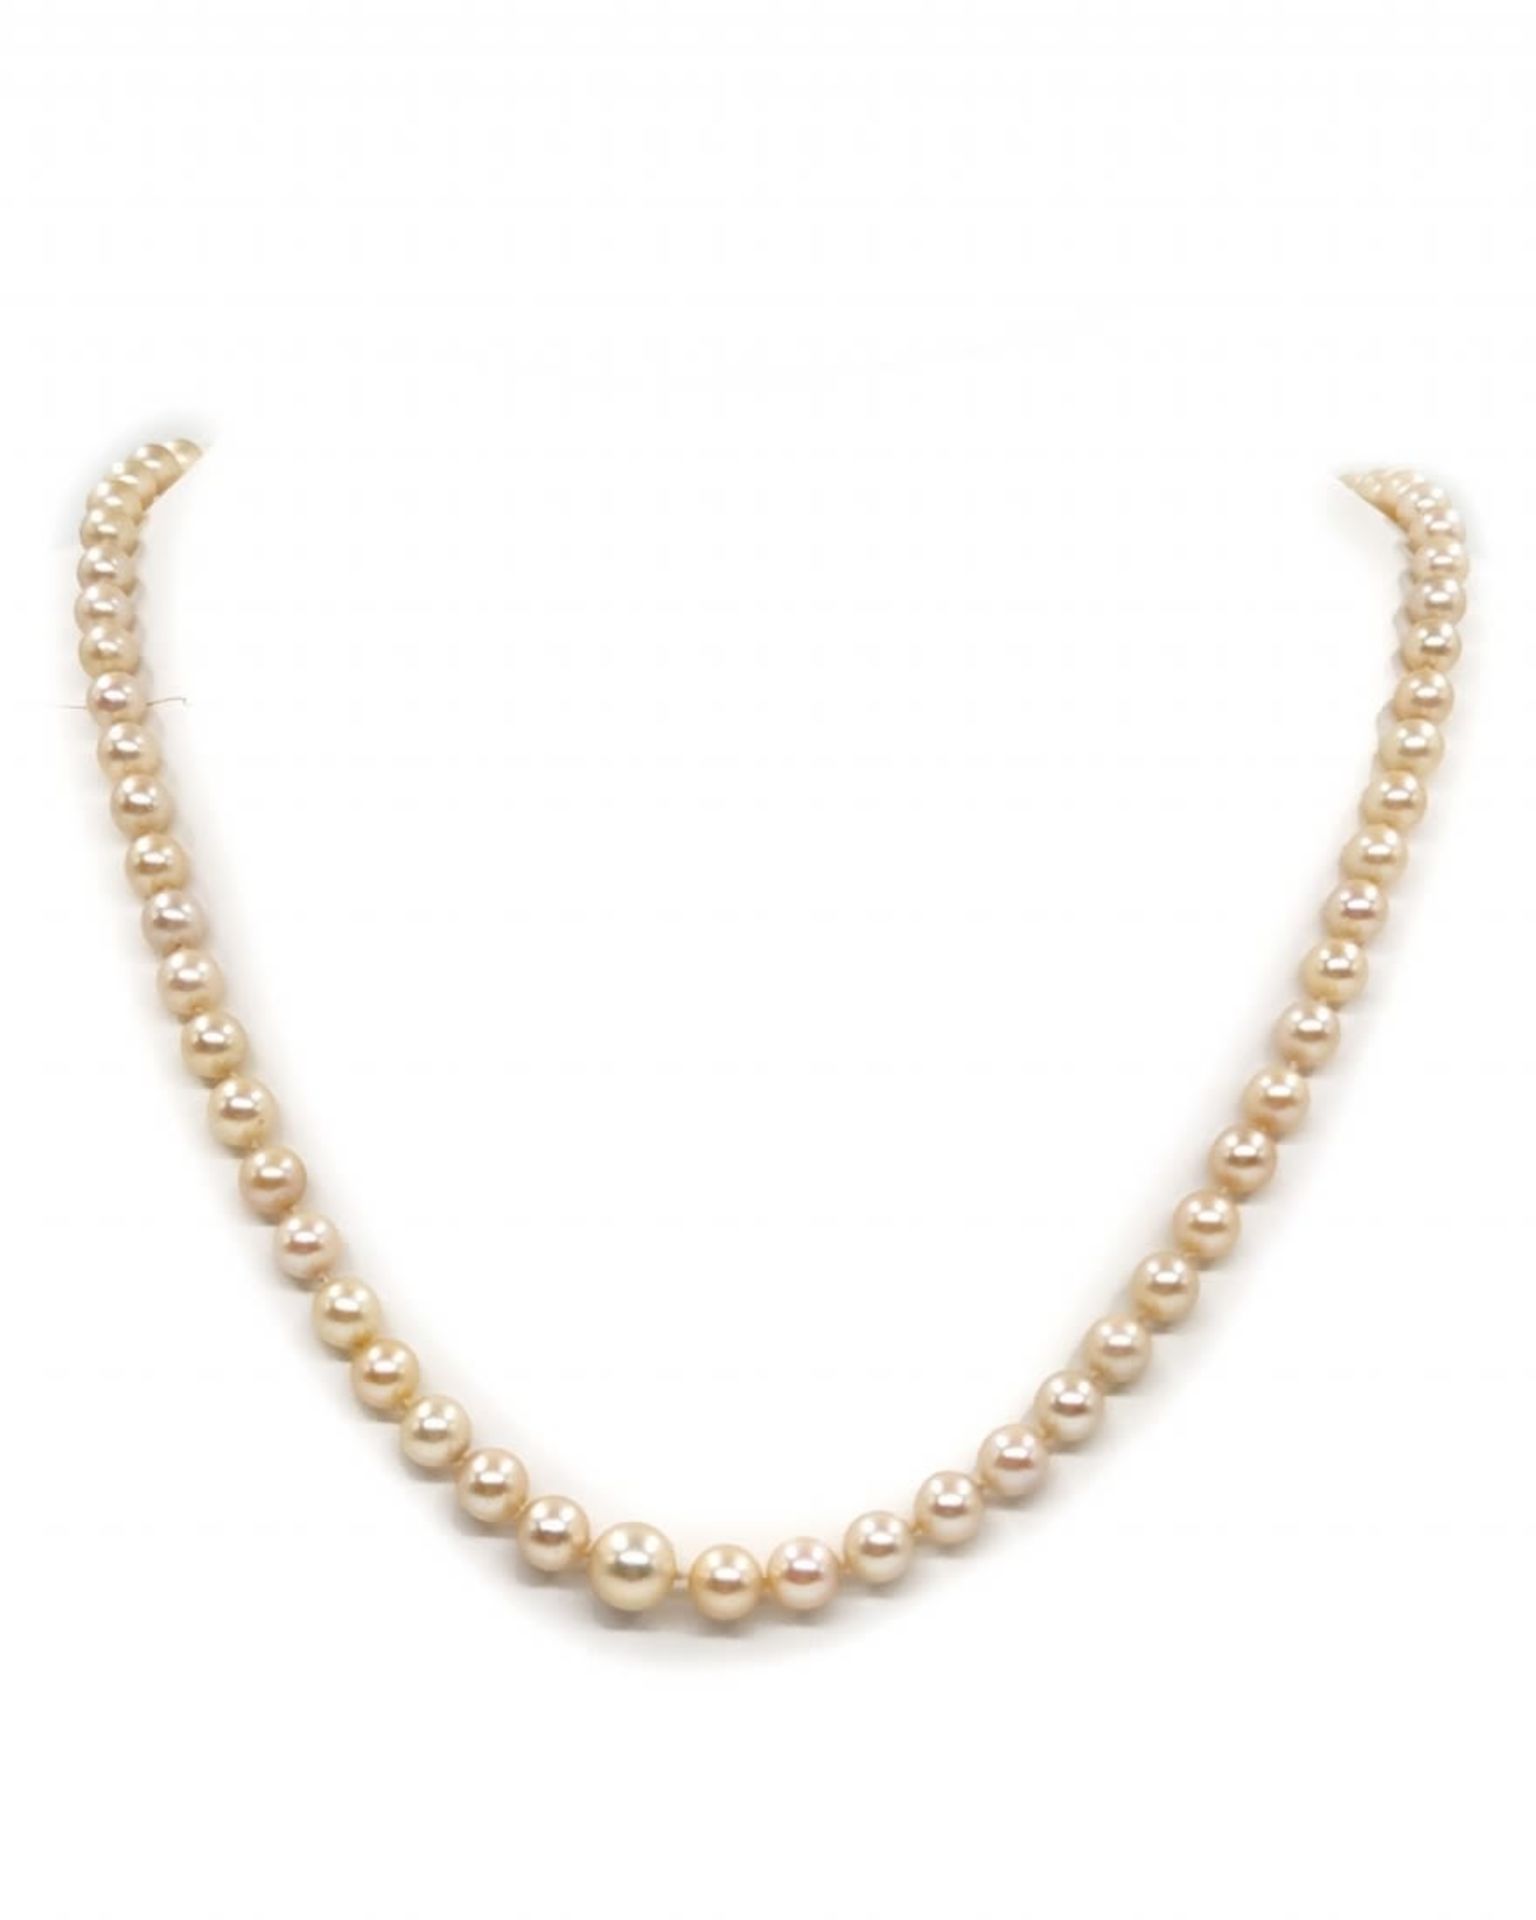 An antique pearl necklace from the 1920s, interwoven with sea pearls of different sizes, a bracket - Bild 2 aus 6